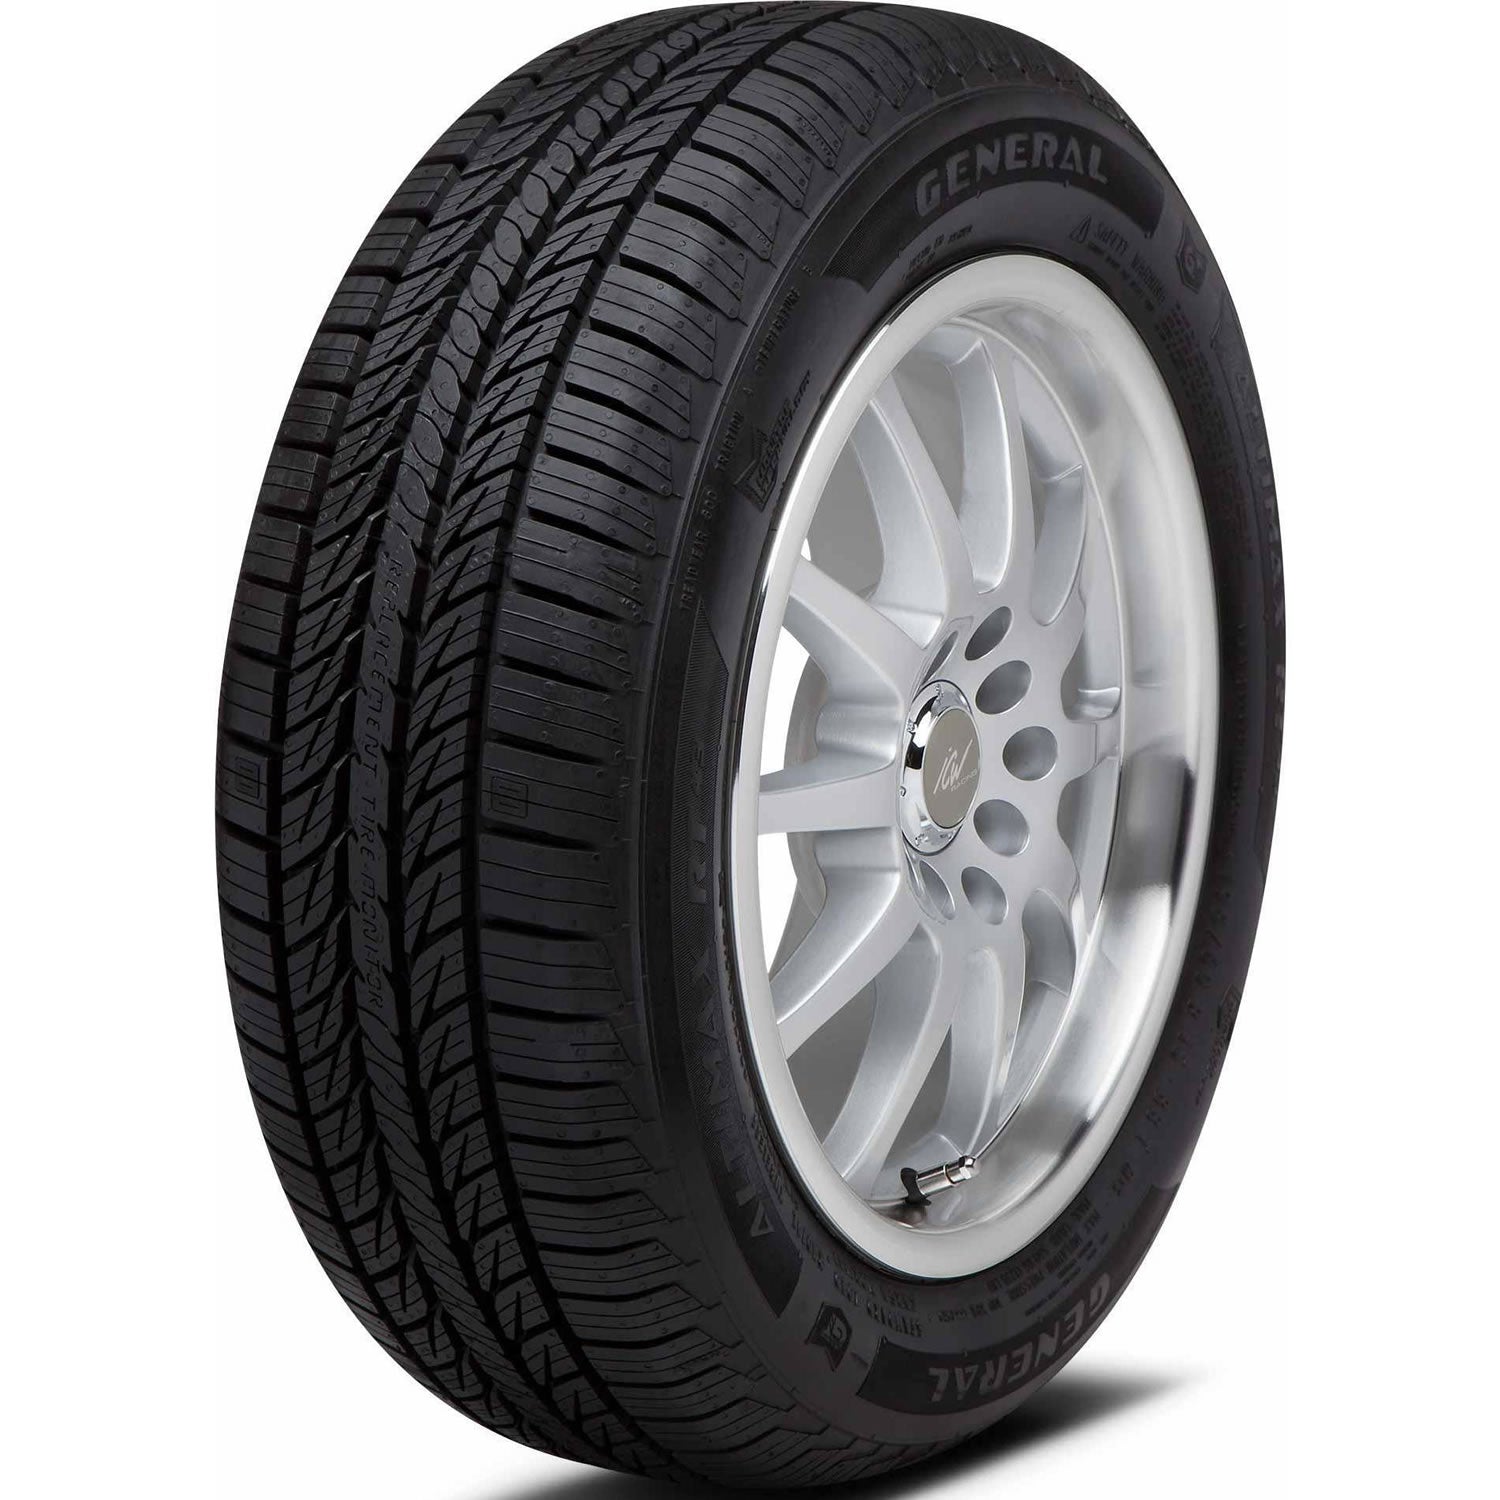 GENERAL ALTIMAX RT43 245/55R18 (28.6X9.7R 18) Tires